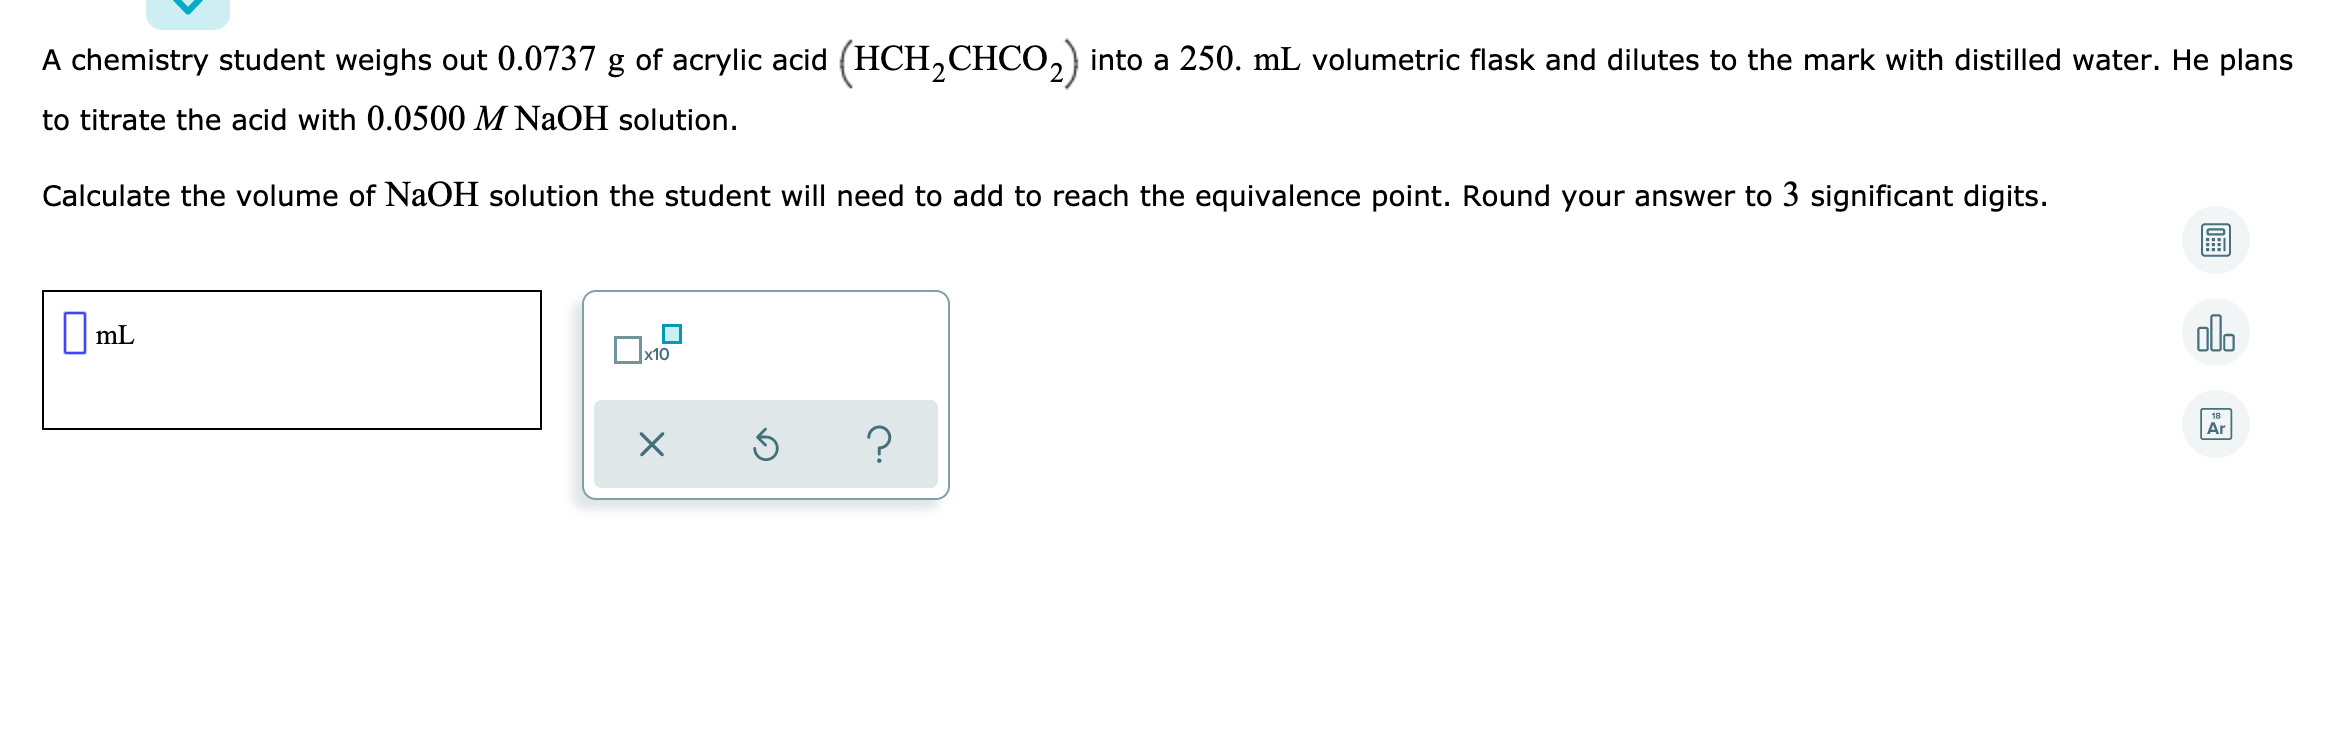 A chemistry student weighs out 0.0737 g of acrylic acid (HCH,CHCO,) into a 250. mL volumetric flask and dilutes to the mark with distilled water. He plans
to titrate the acid with 0.0500 M NaOH solution.
Calculate the volume of NaOH solution the student will need to add to reach the equivalence point. Round your answer to 3 significant digits.
